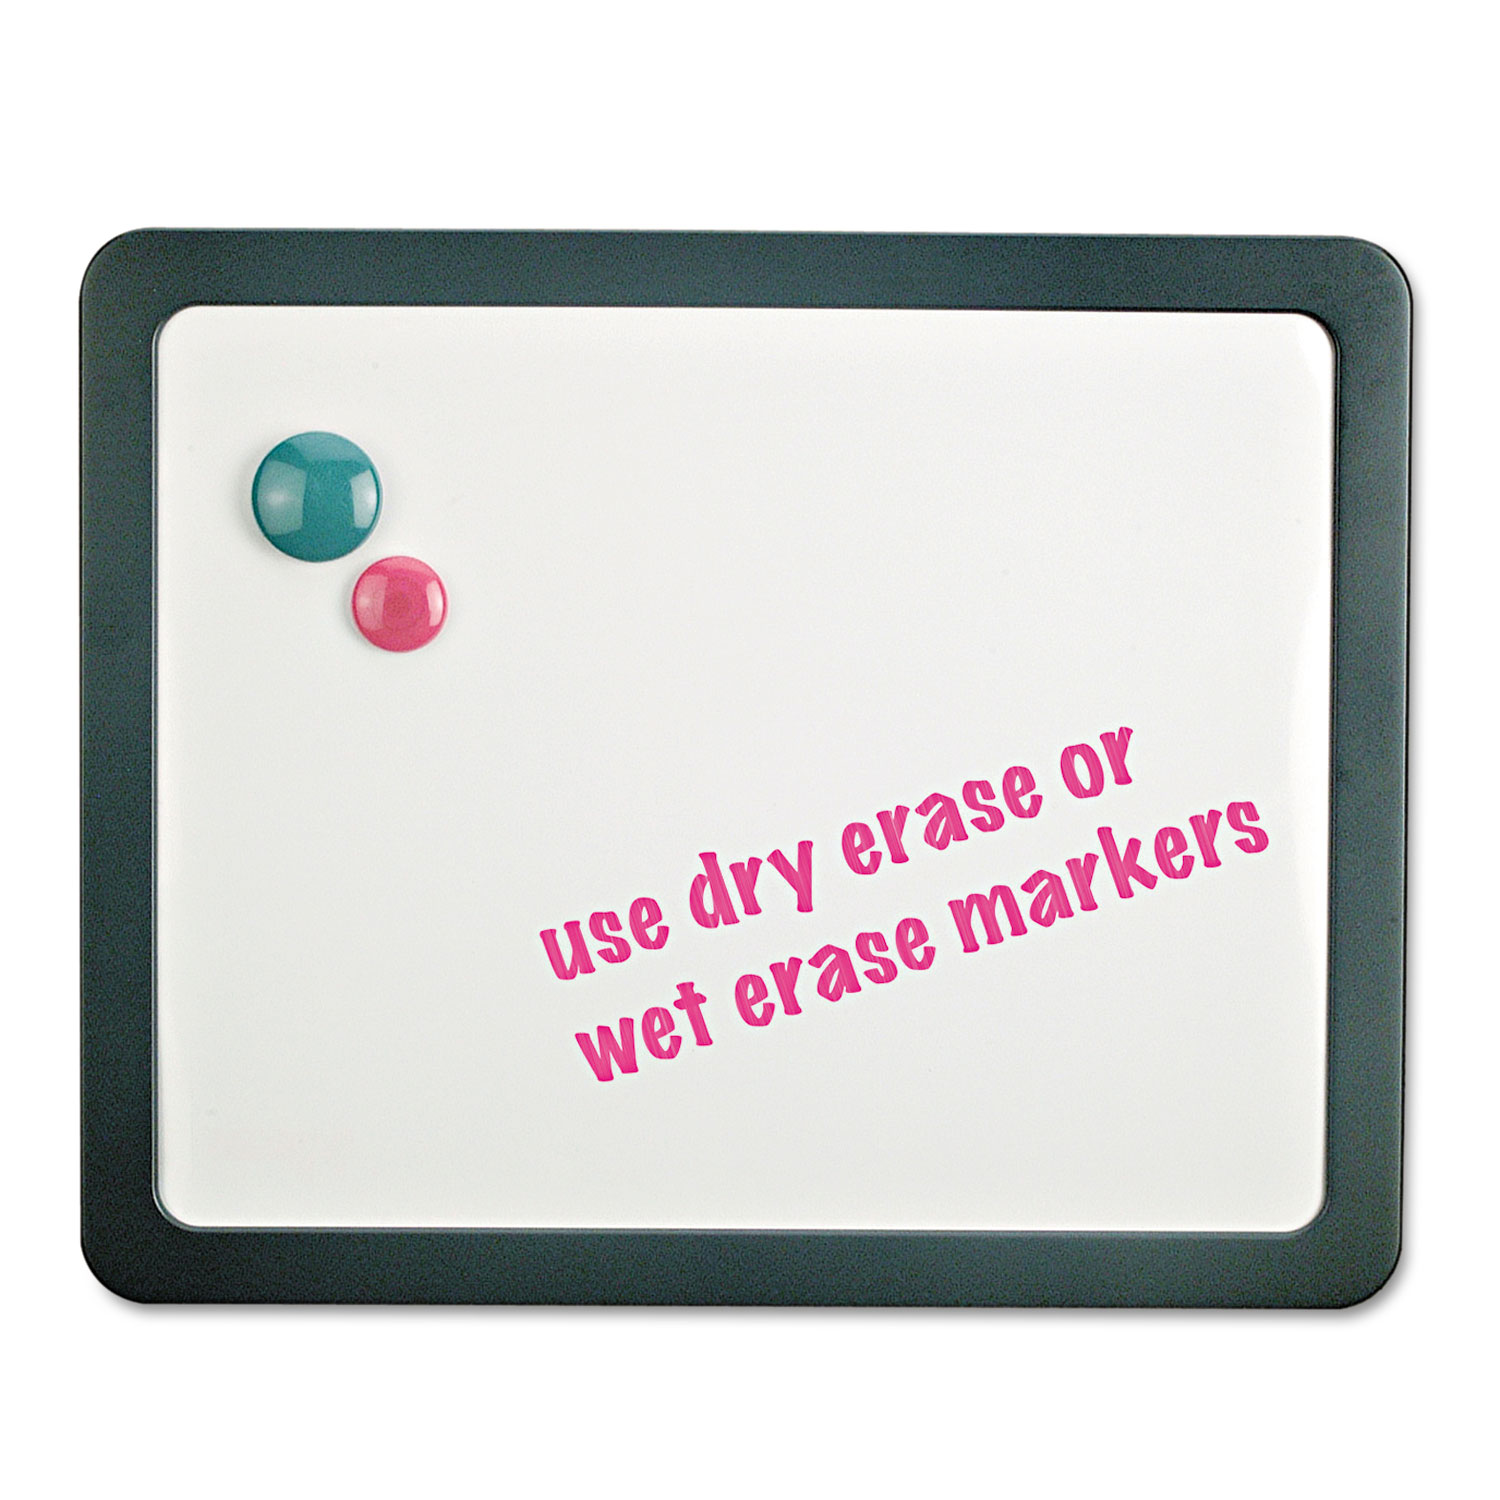  Universal UNV08165 Recycled Cubicle Dry Erase Board, 15 7/8 x 12 7/8, Charcoal, with Three Magnets (UNV08165) 